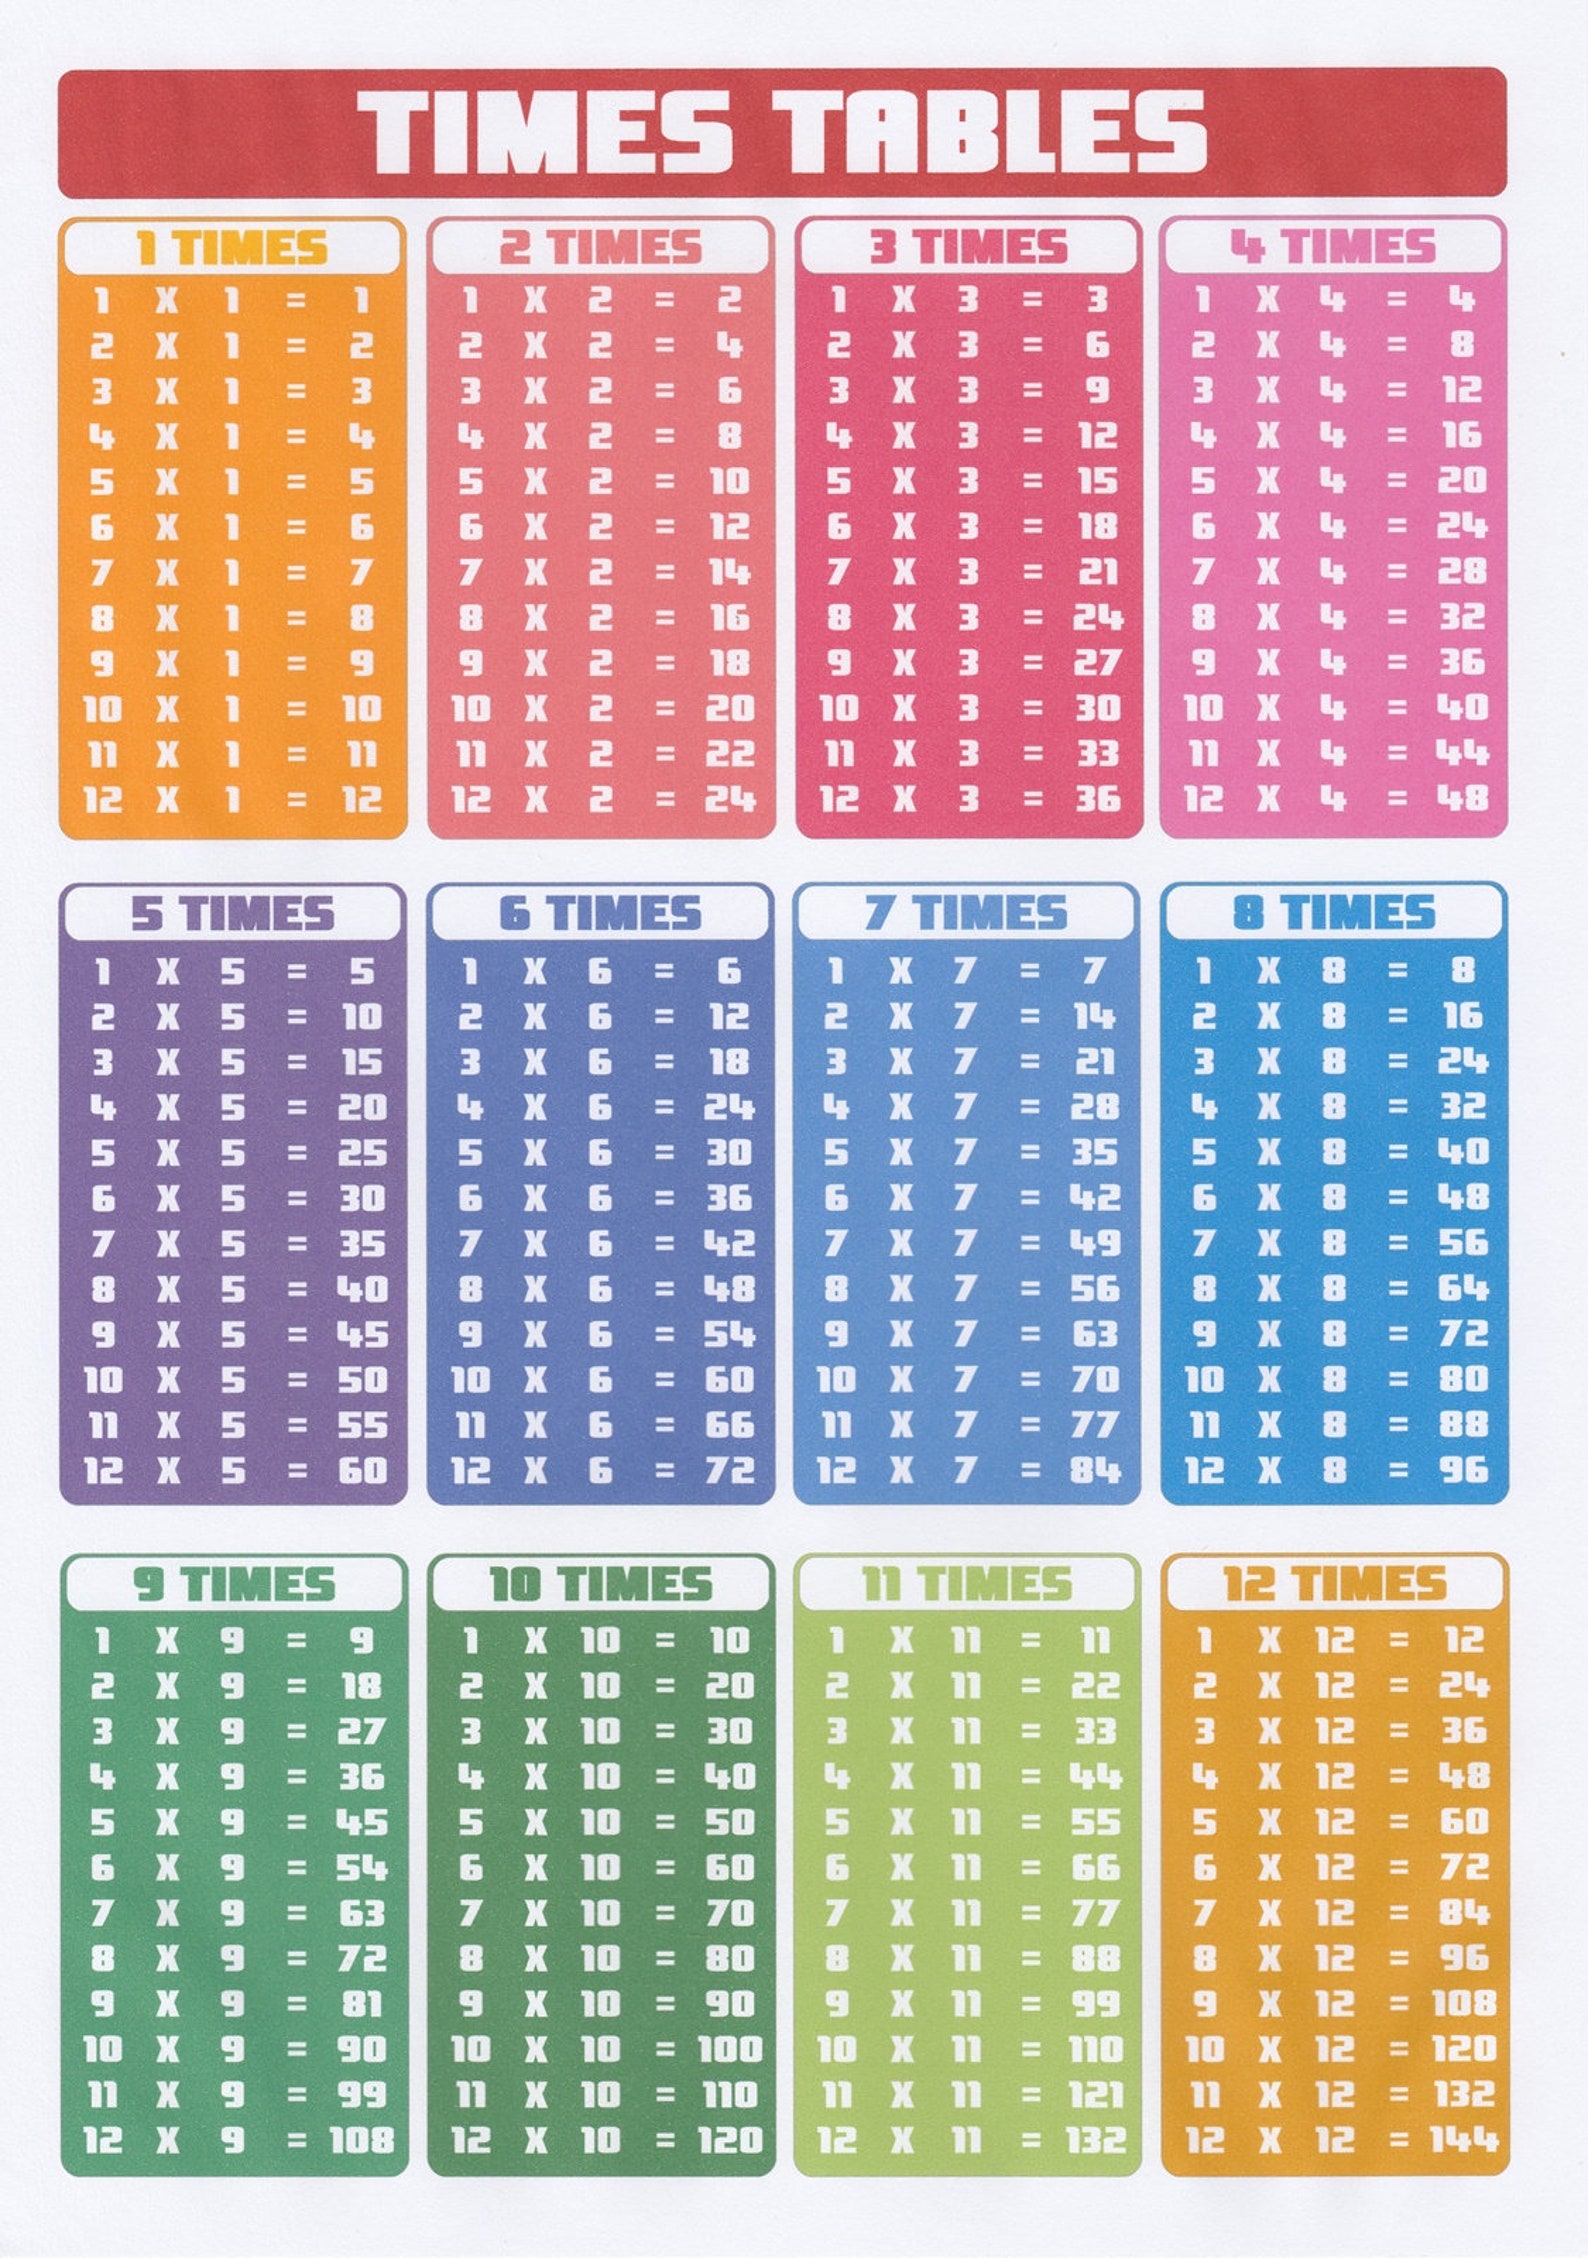 All Times Tables Up To 12